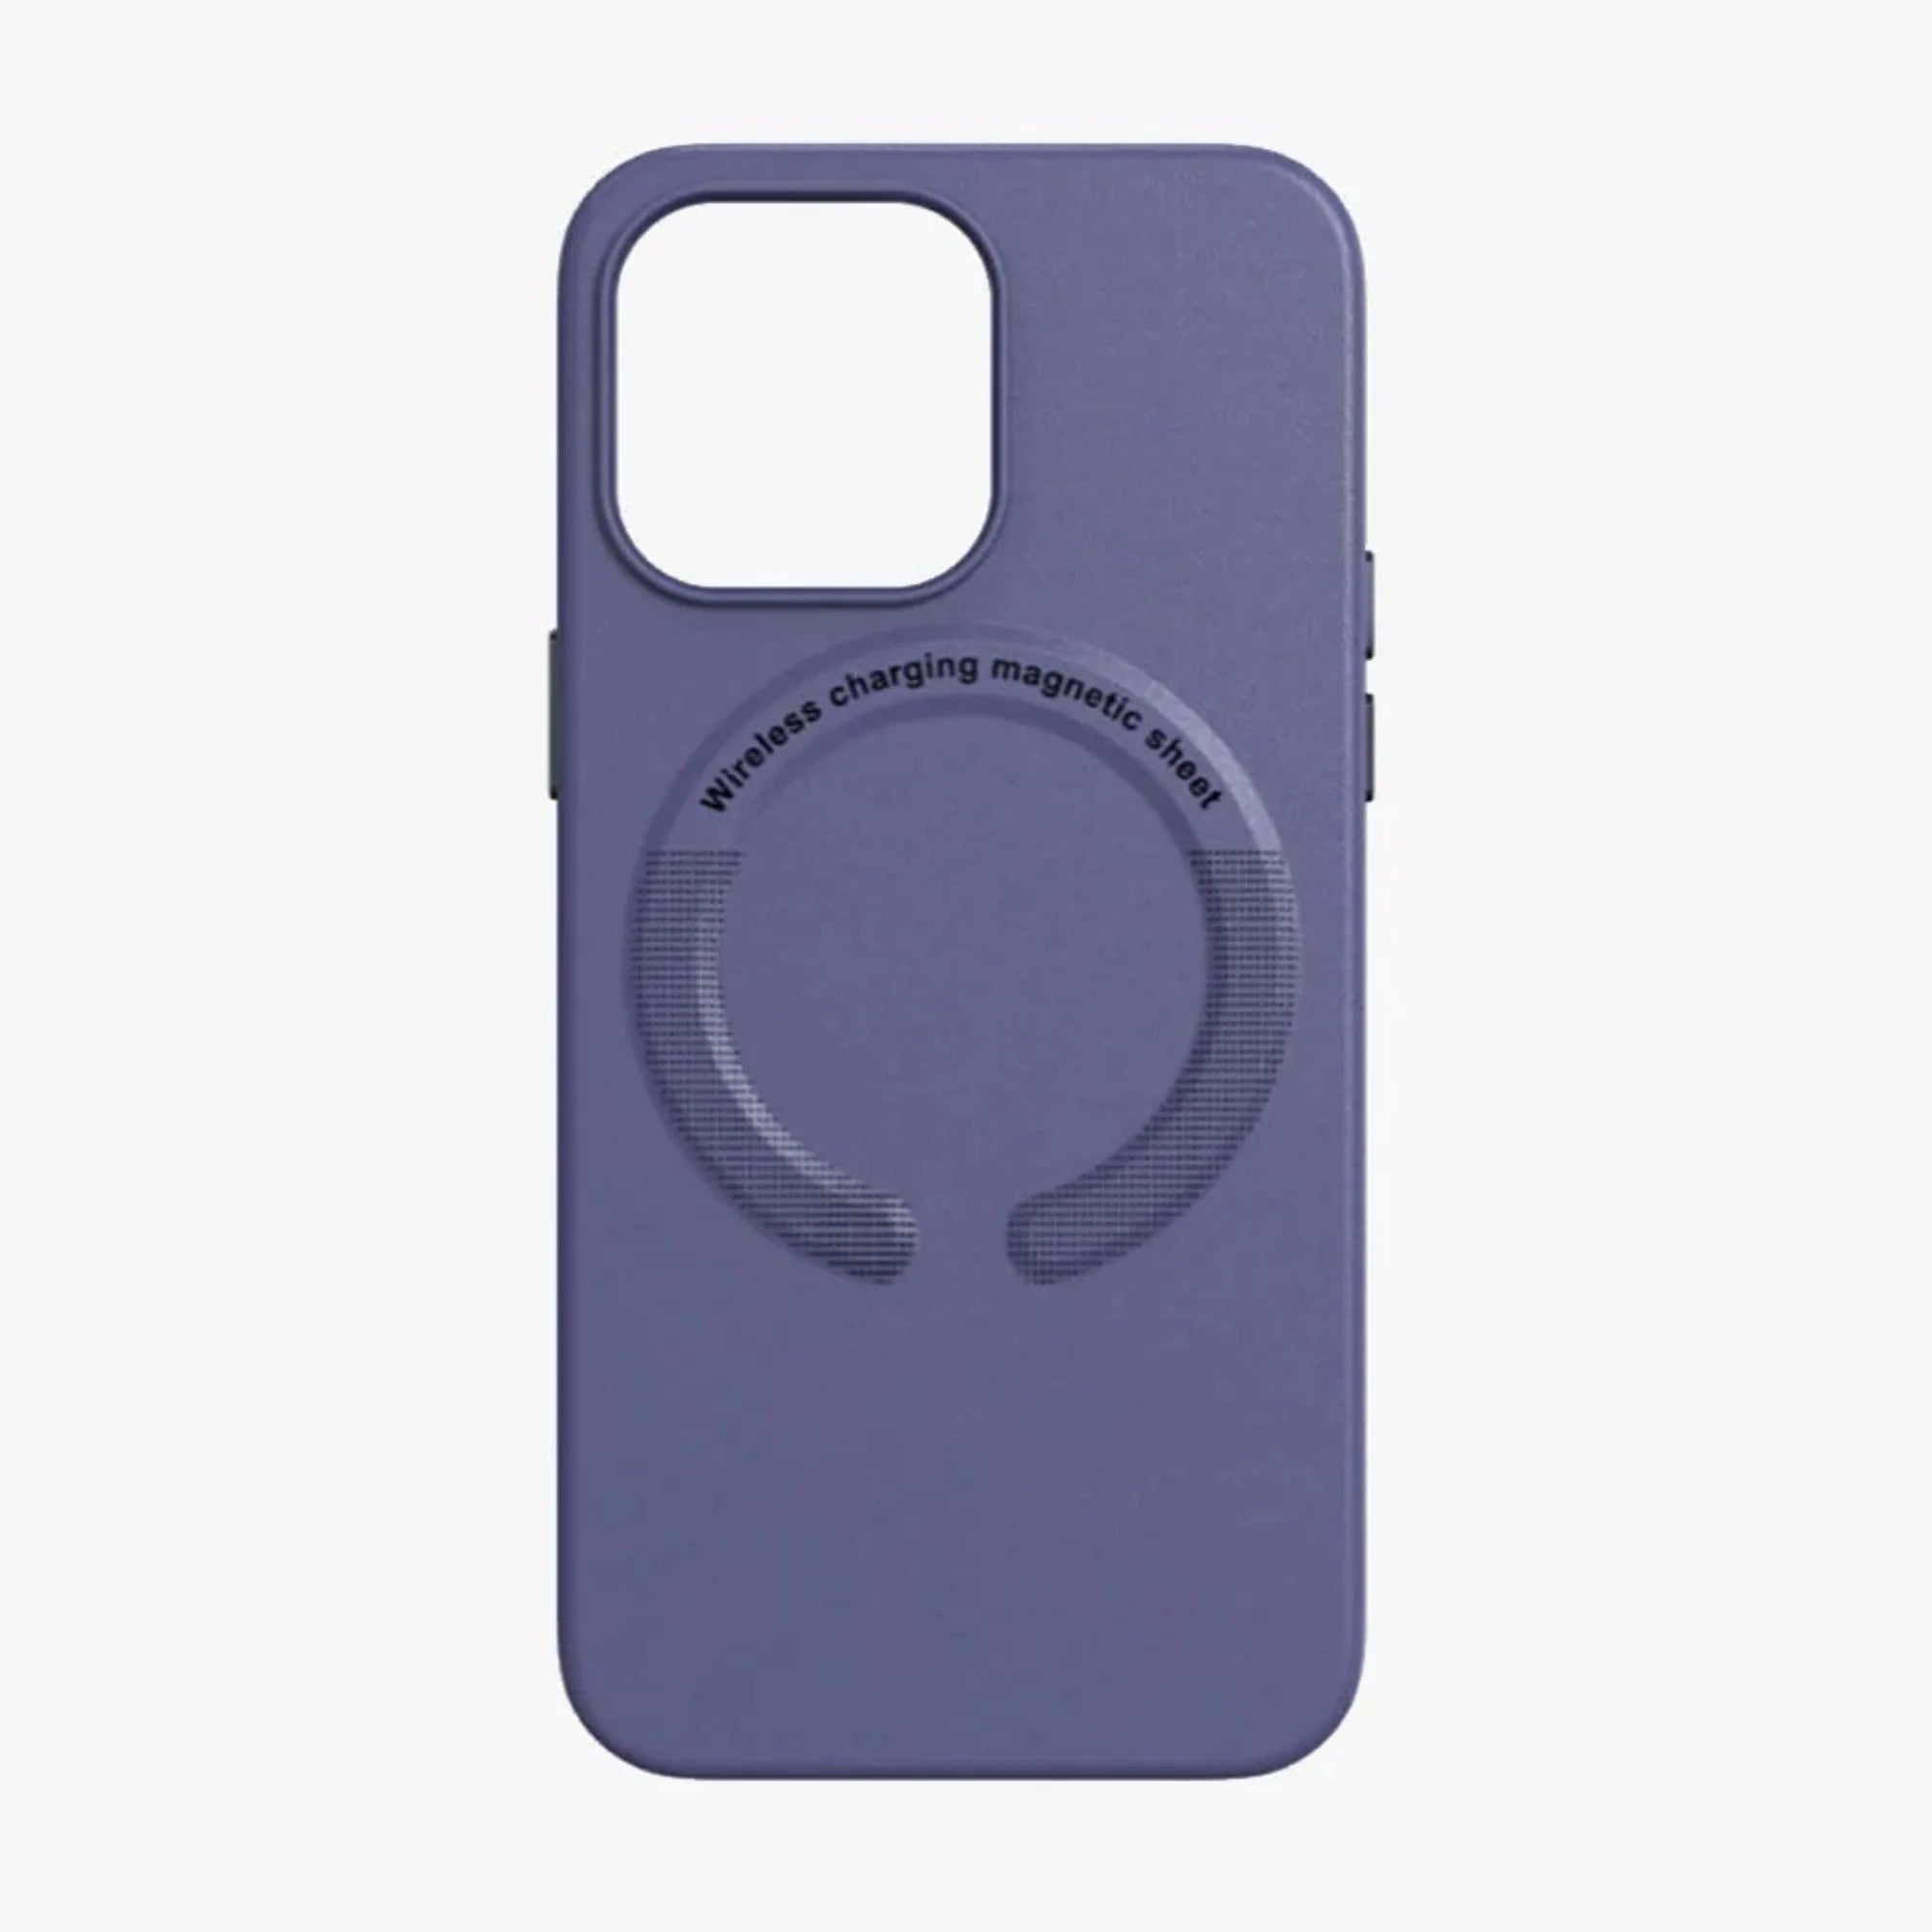 iPhone 12 mini Silicone Case with MagSafe - Deep Navy - Apple